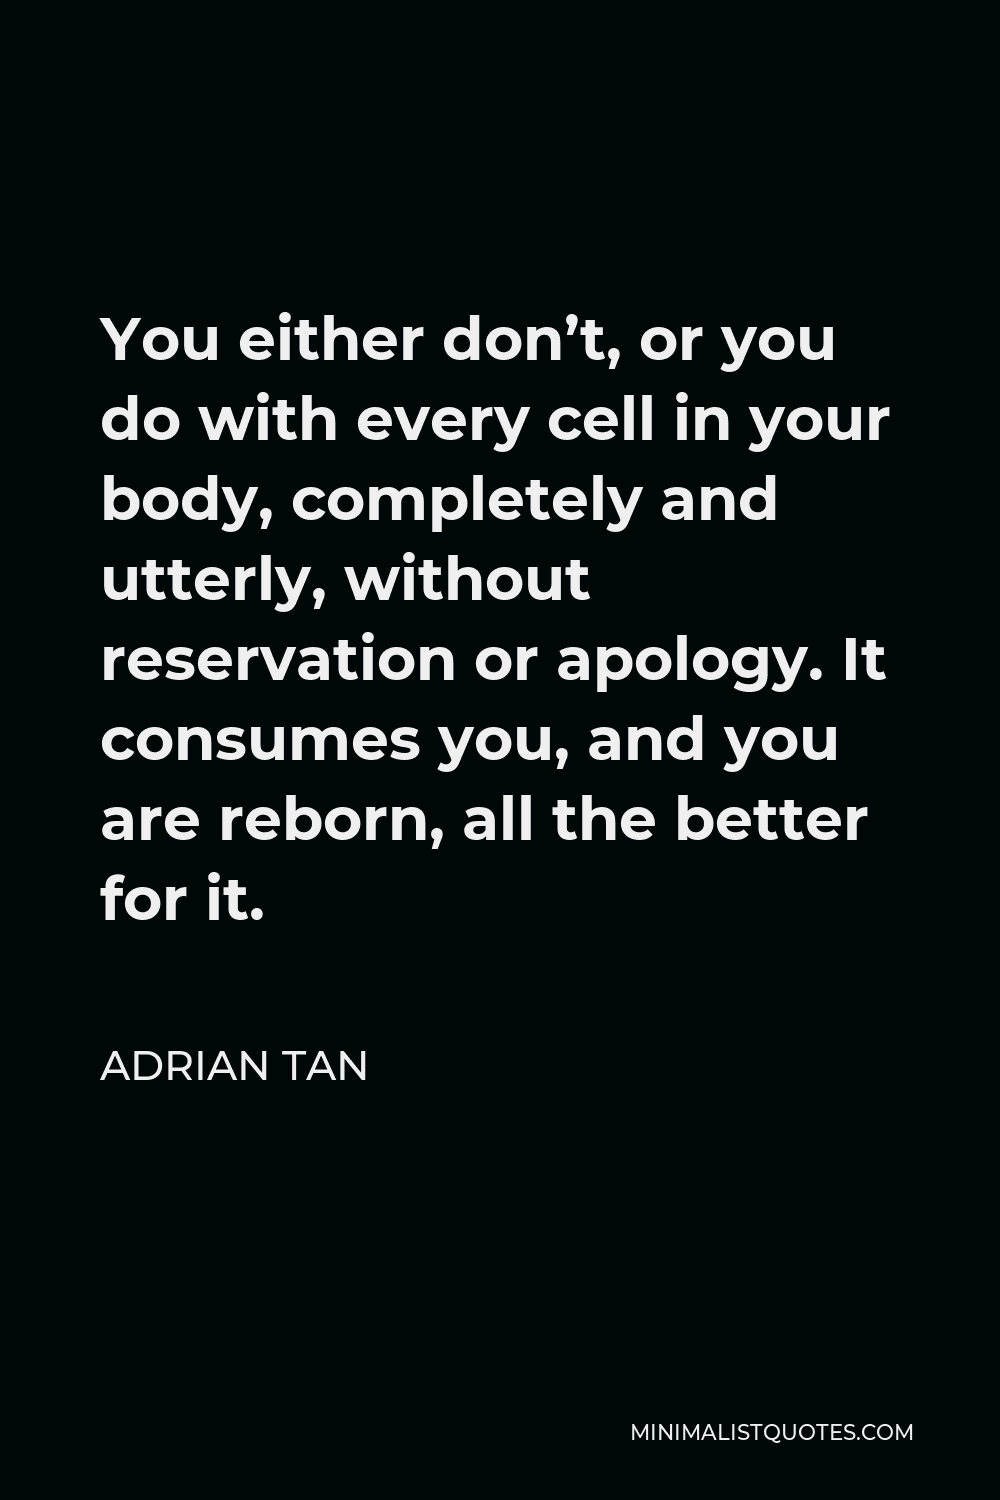 Adrian Tan Quote - You either don’t, or you do with every cell in your body, completely and utterly, without reservation or apology. It consumes you, and you are reborn, all the better for it.